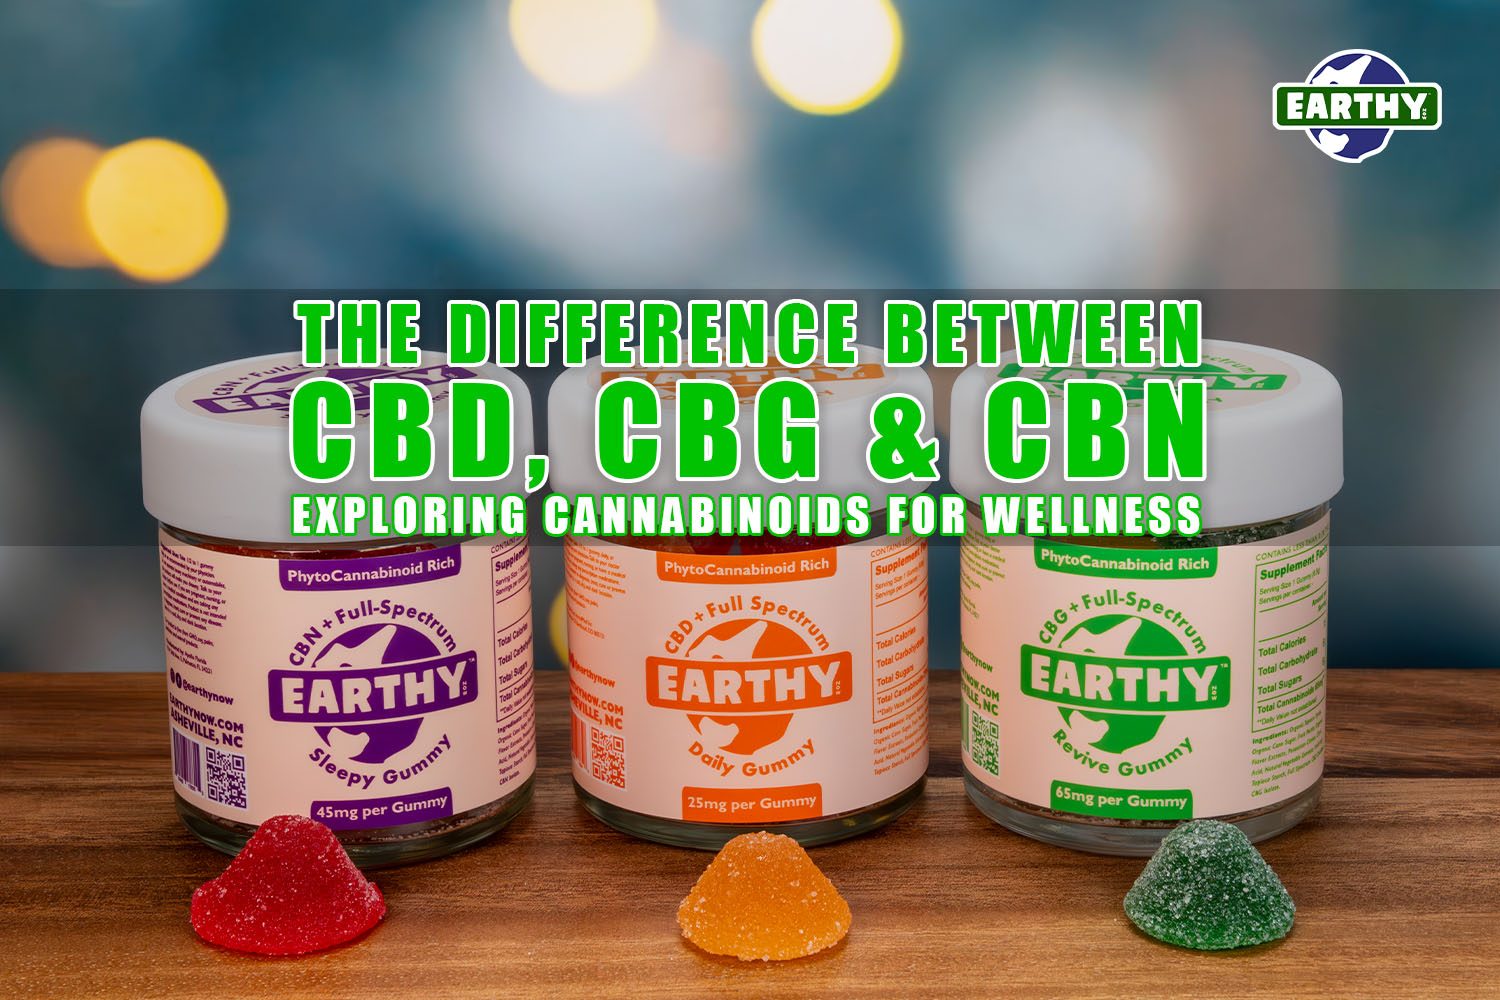 The Difference Between CBD, CBG, and CBN: Exploring Cannabinoids for Wellness | Earthy Now